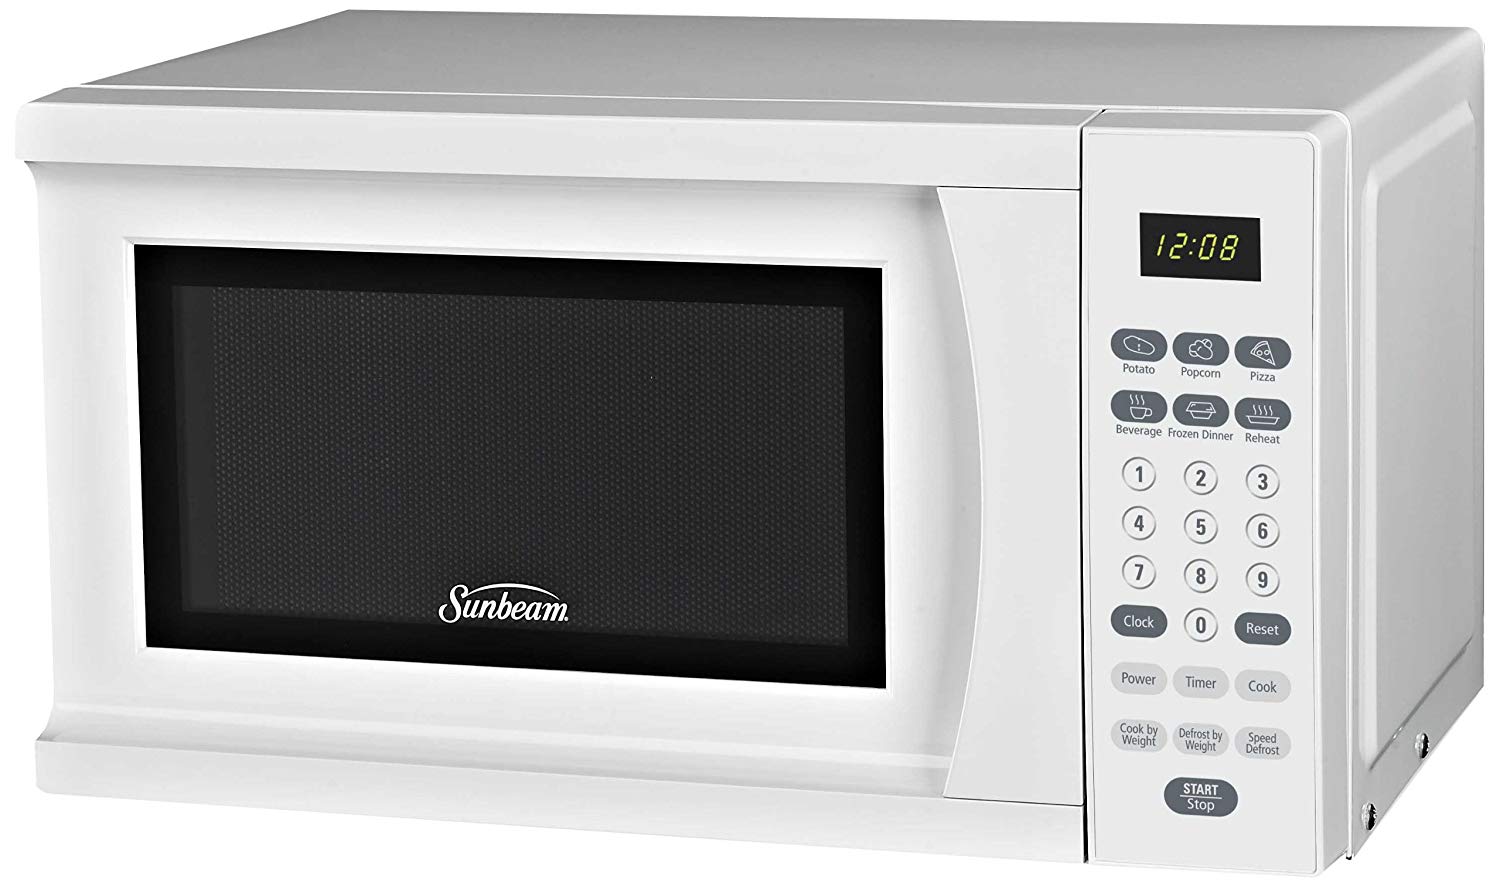 Sunbeam SGS90701W 0.7-Cubic Feet Microwave Oven, White